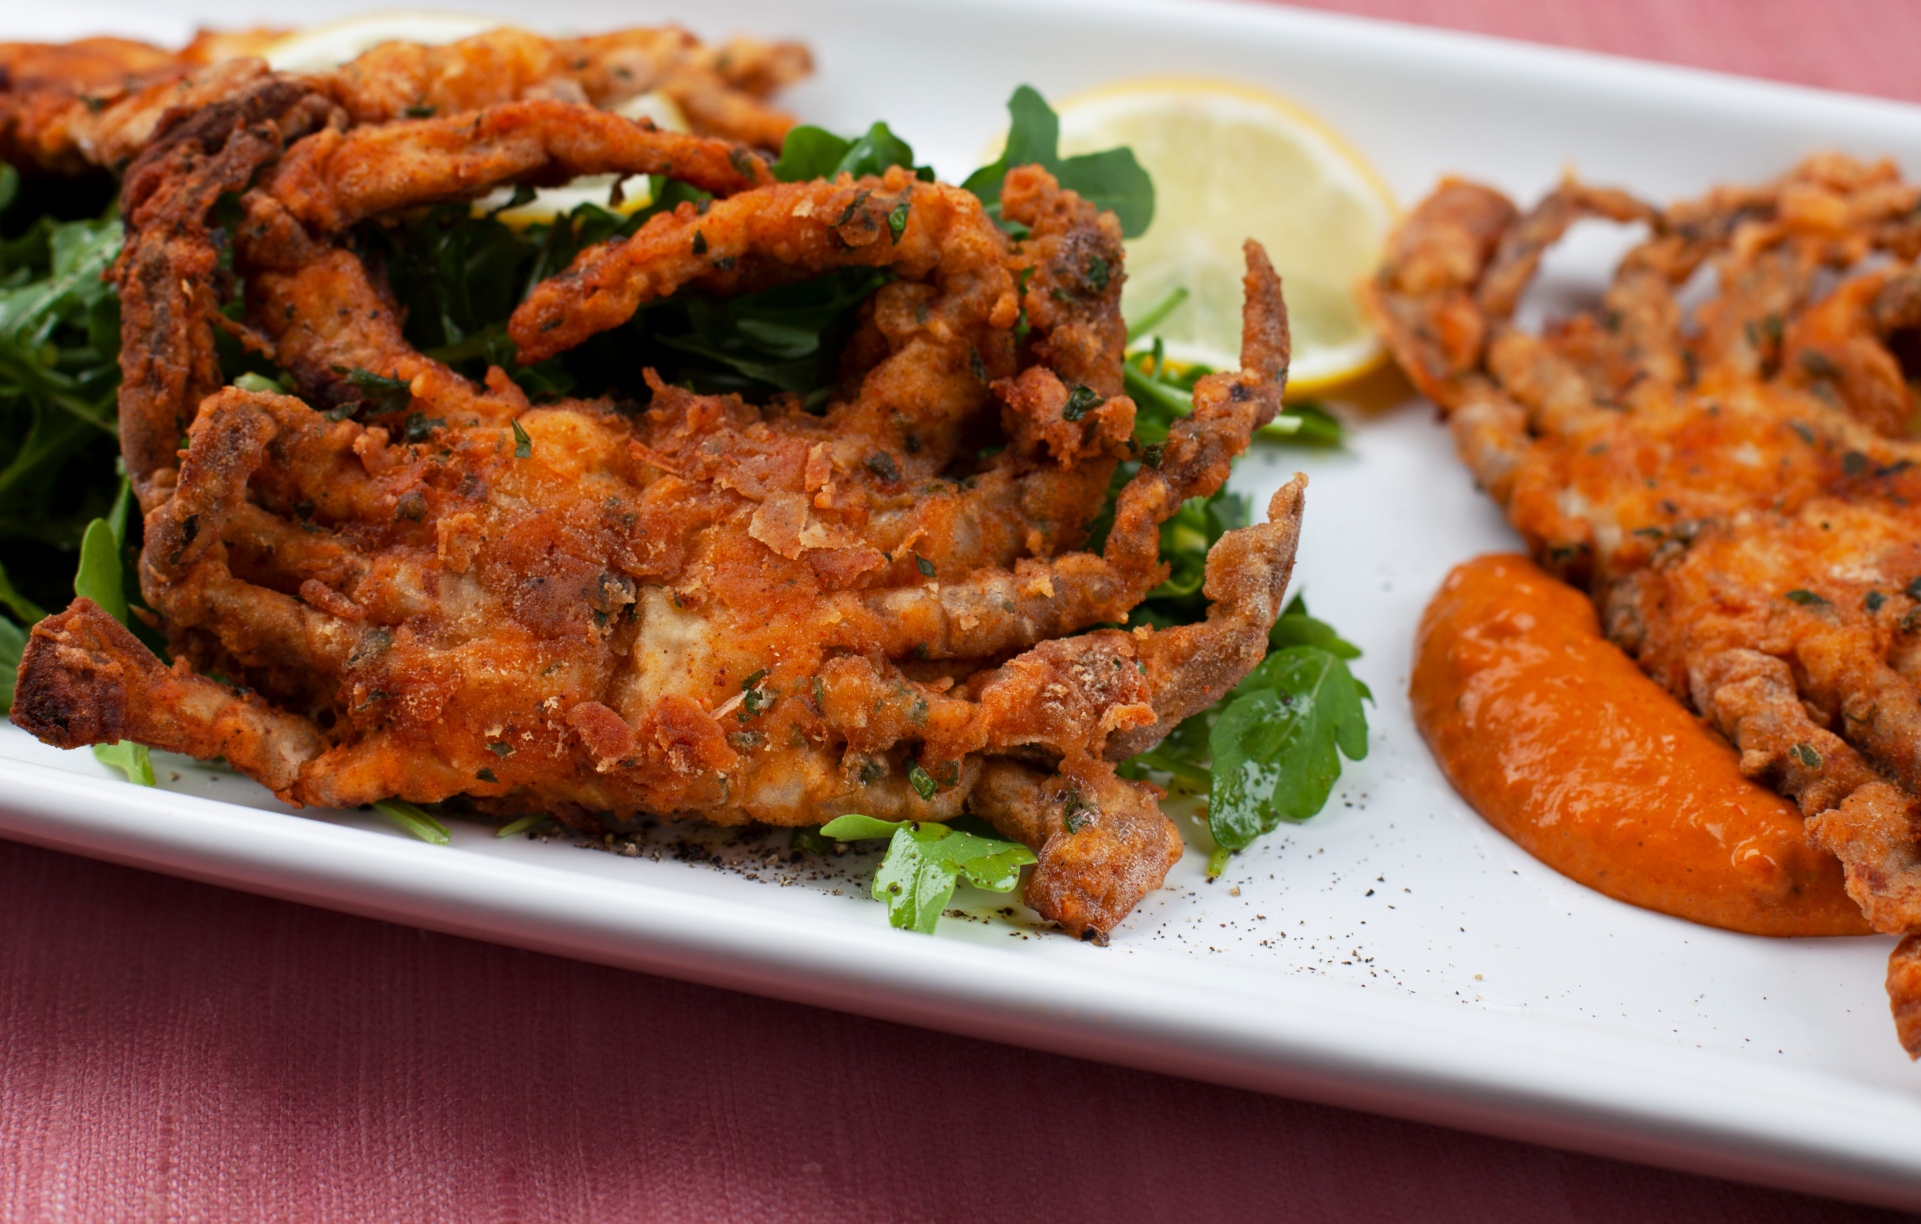 Fried soft shell crab